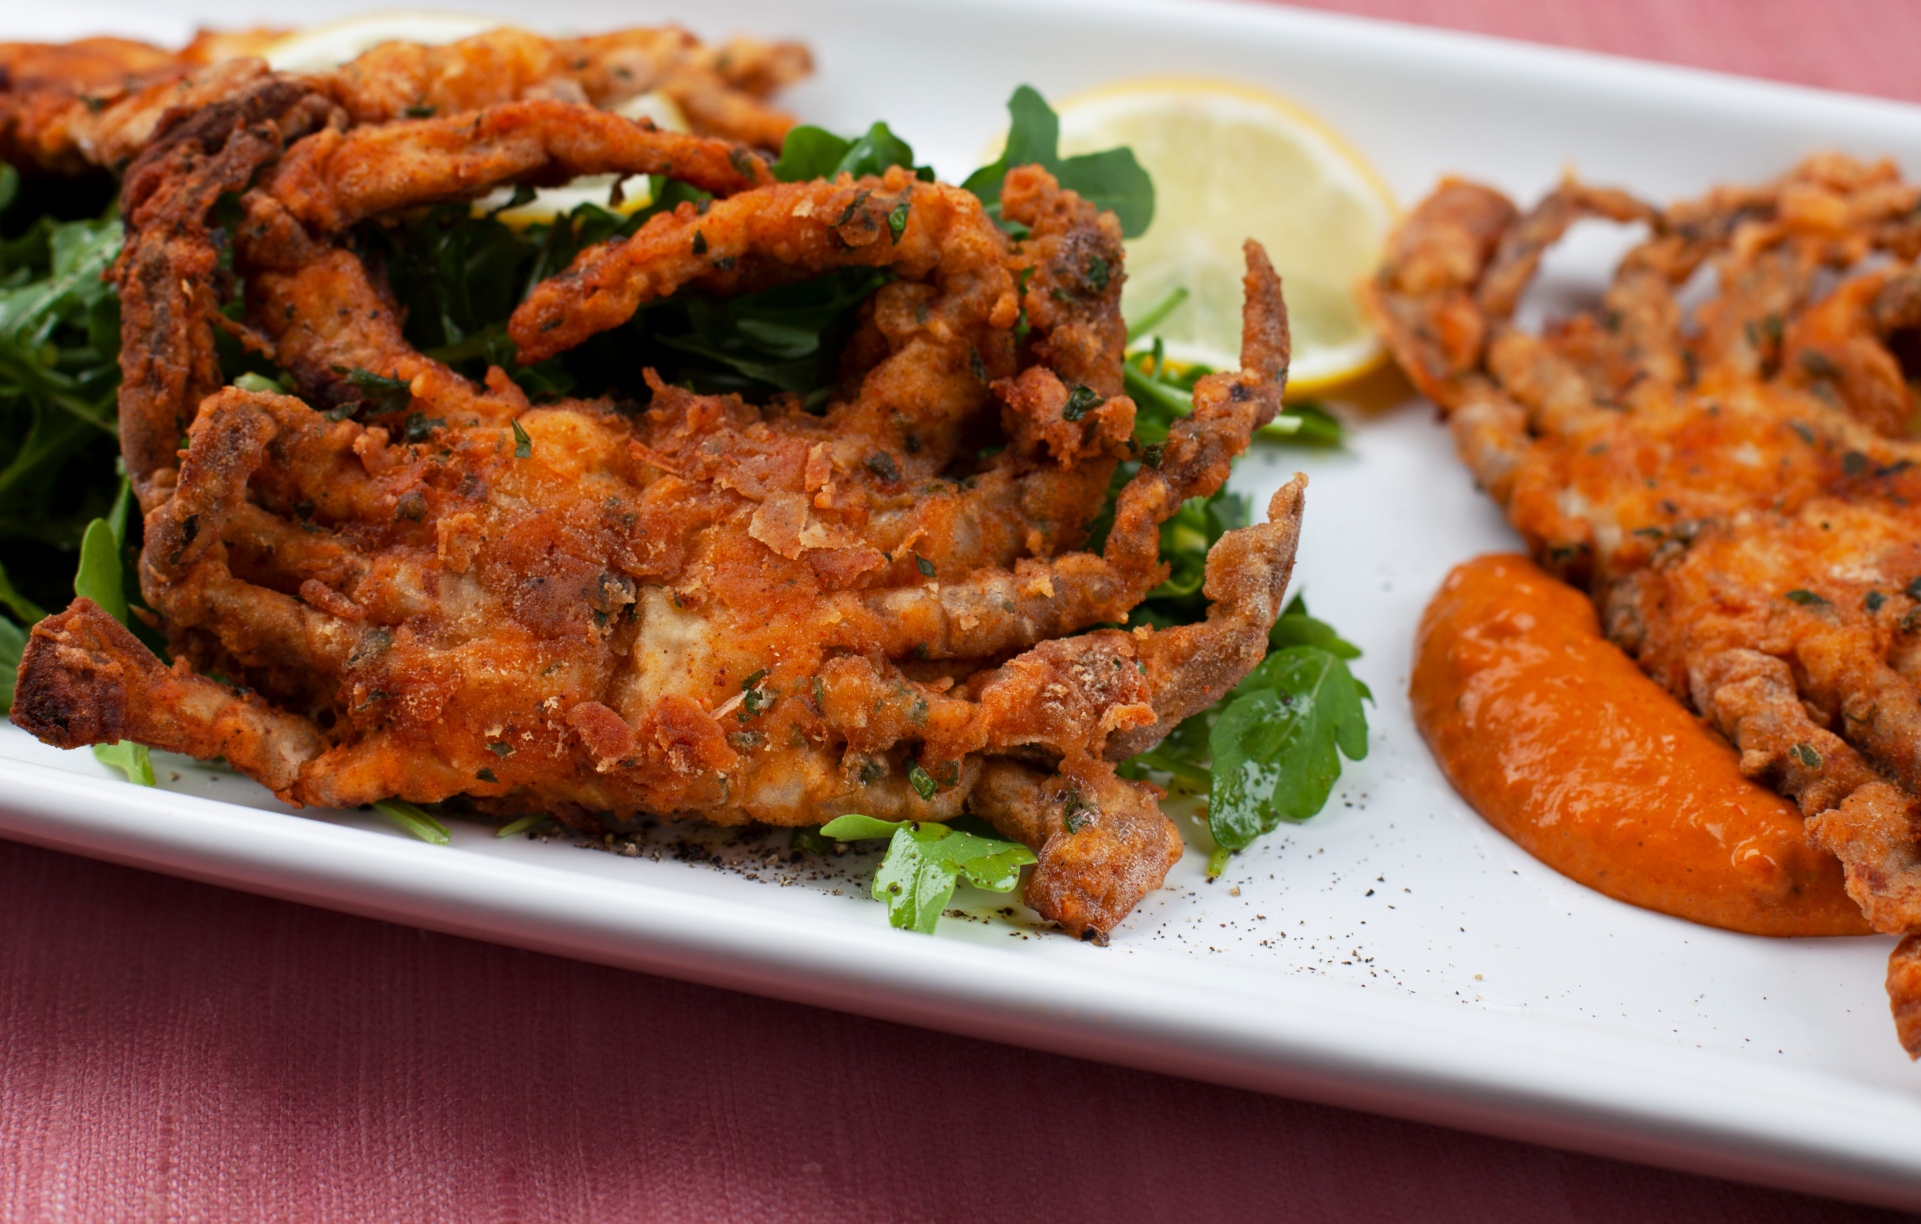 Fried soft shell crab